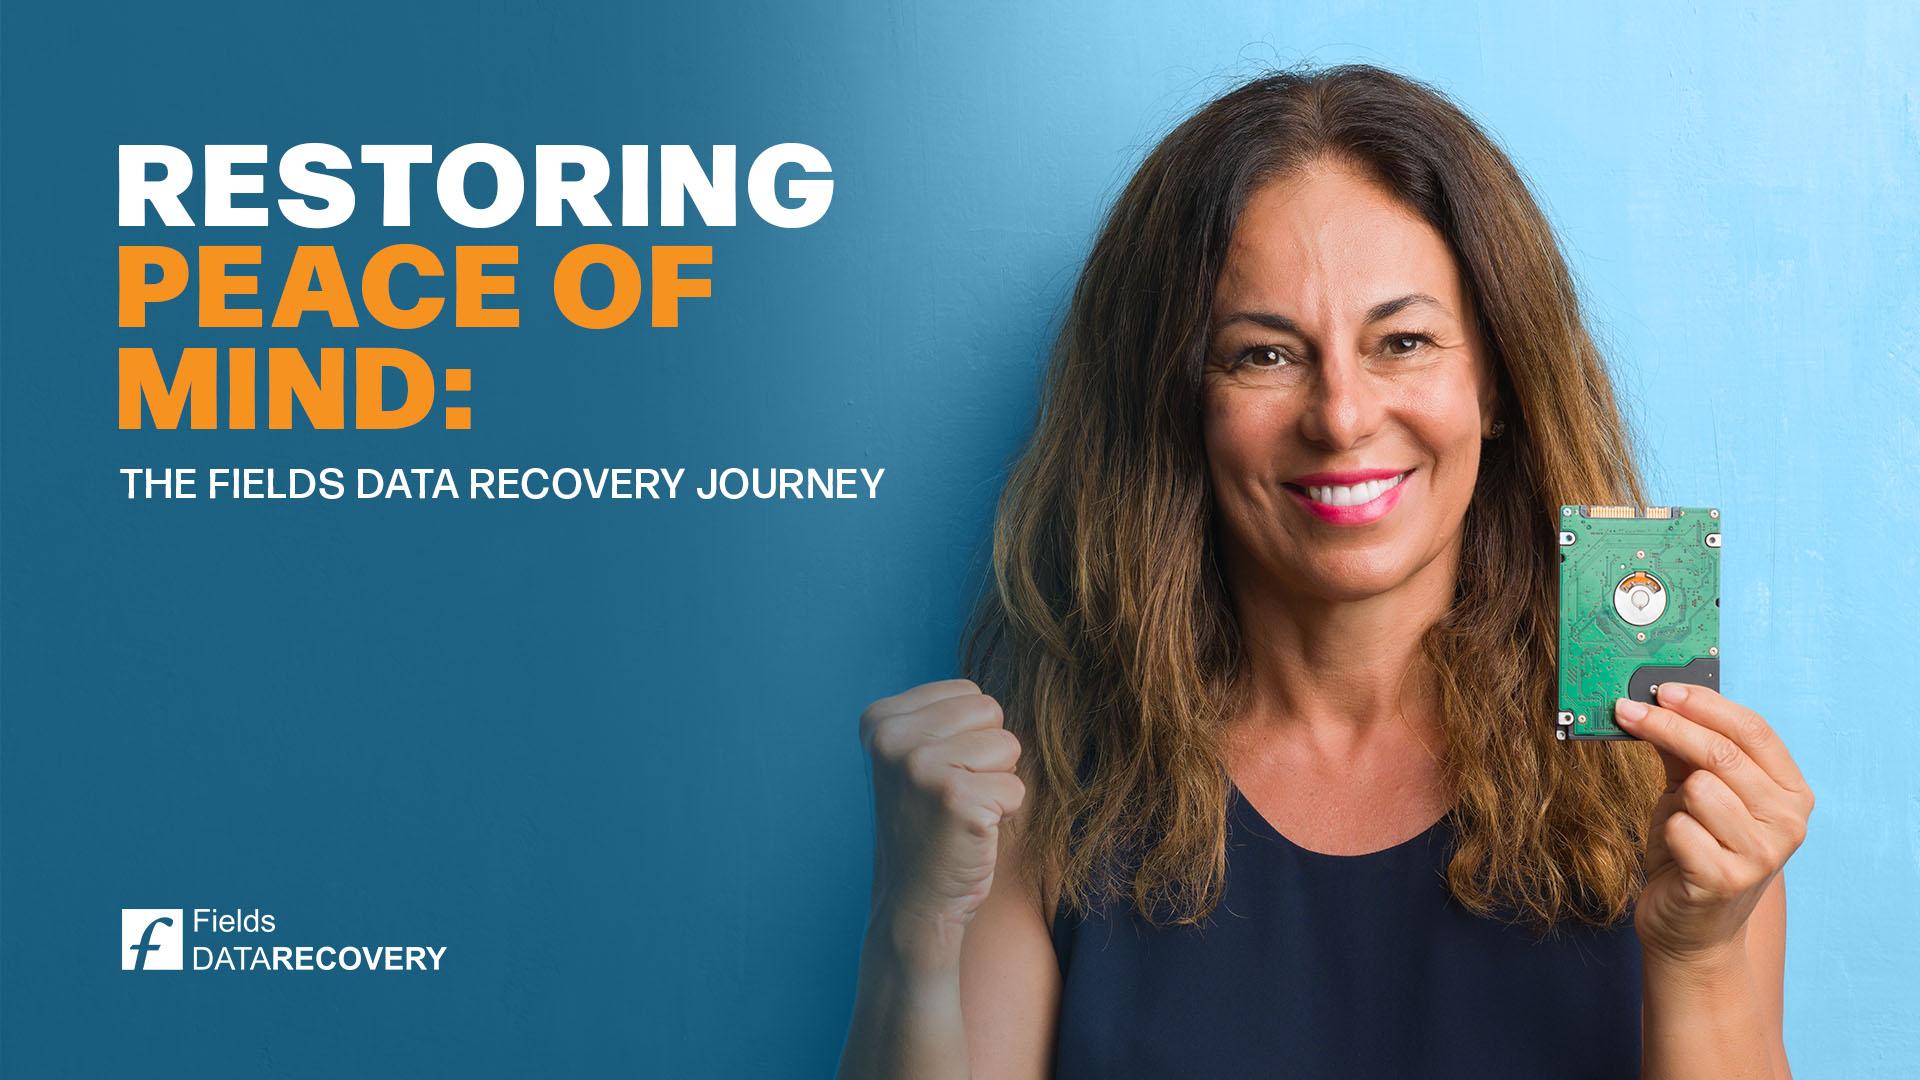 Restoring Peace of Mind: The Fields Data Recovery Journey